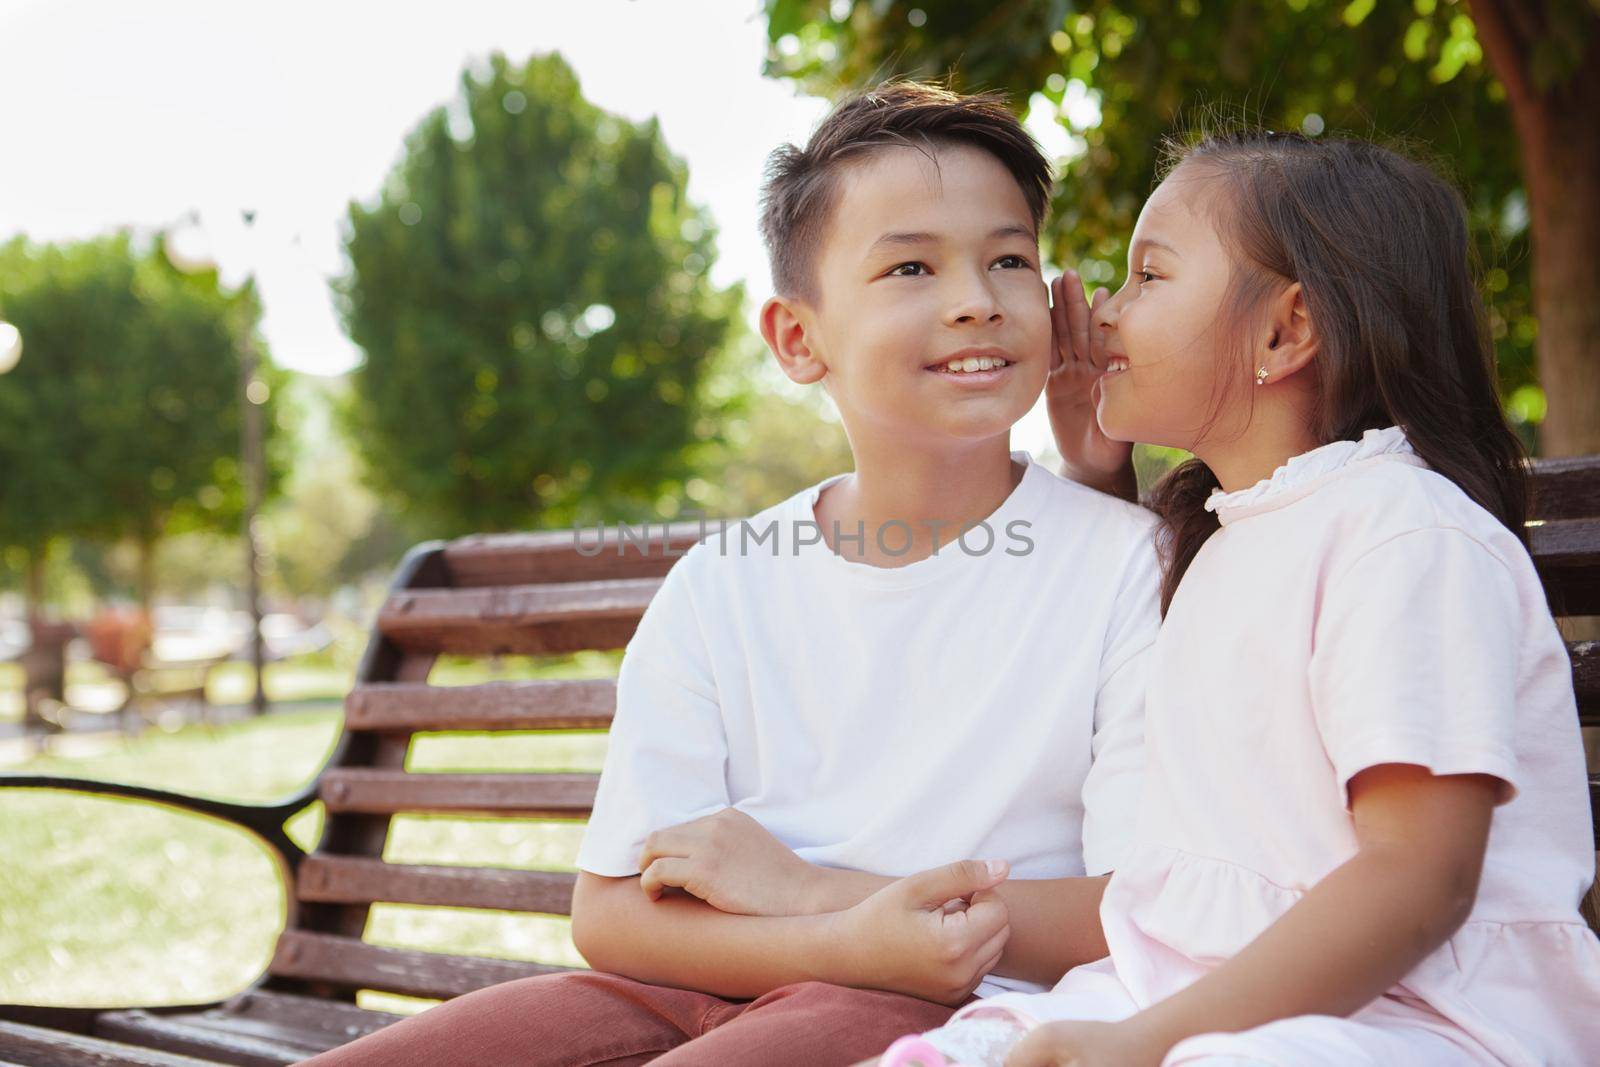 Charming Asian young boy smiling while his little sister whispering secrets to his ear. Cute little kids sharing secrets, gossiping in the park, copy space